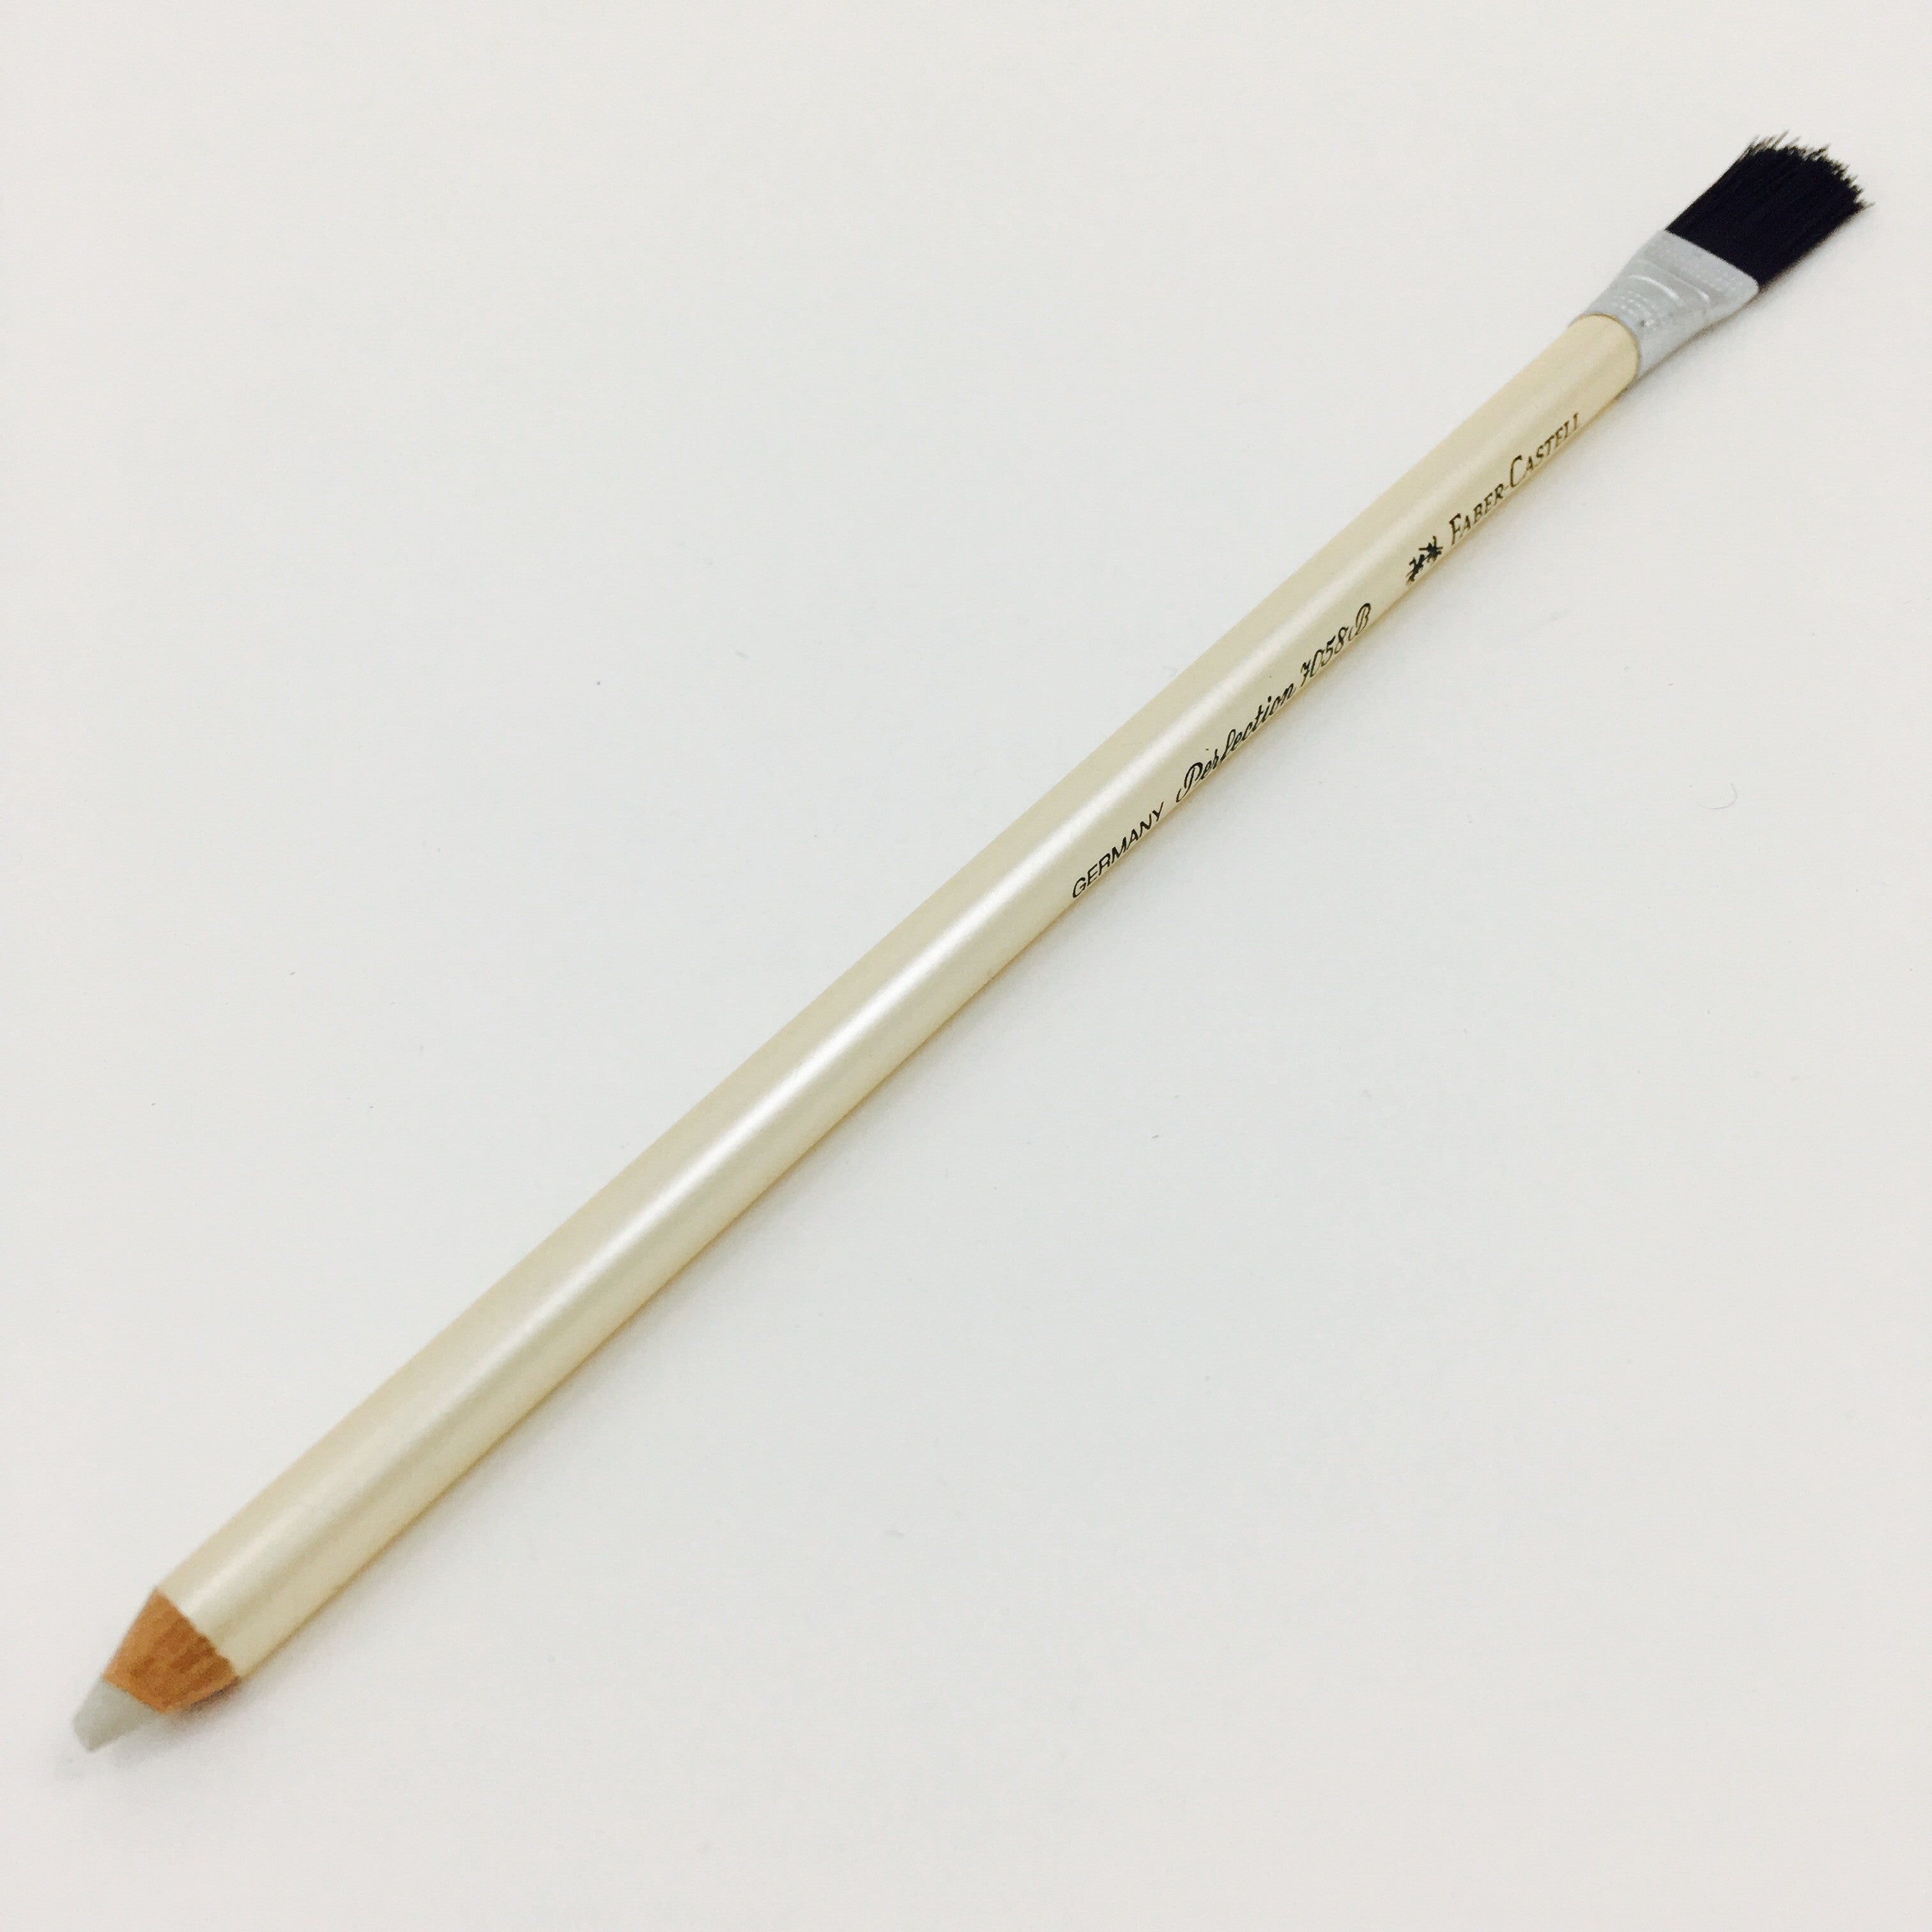 Faber-Castell Perfection Eraser Pencil with Brush